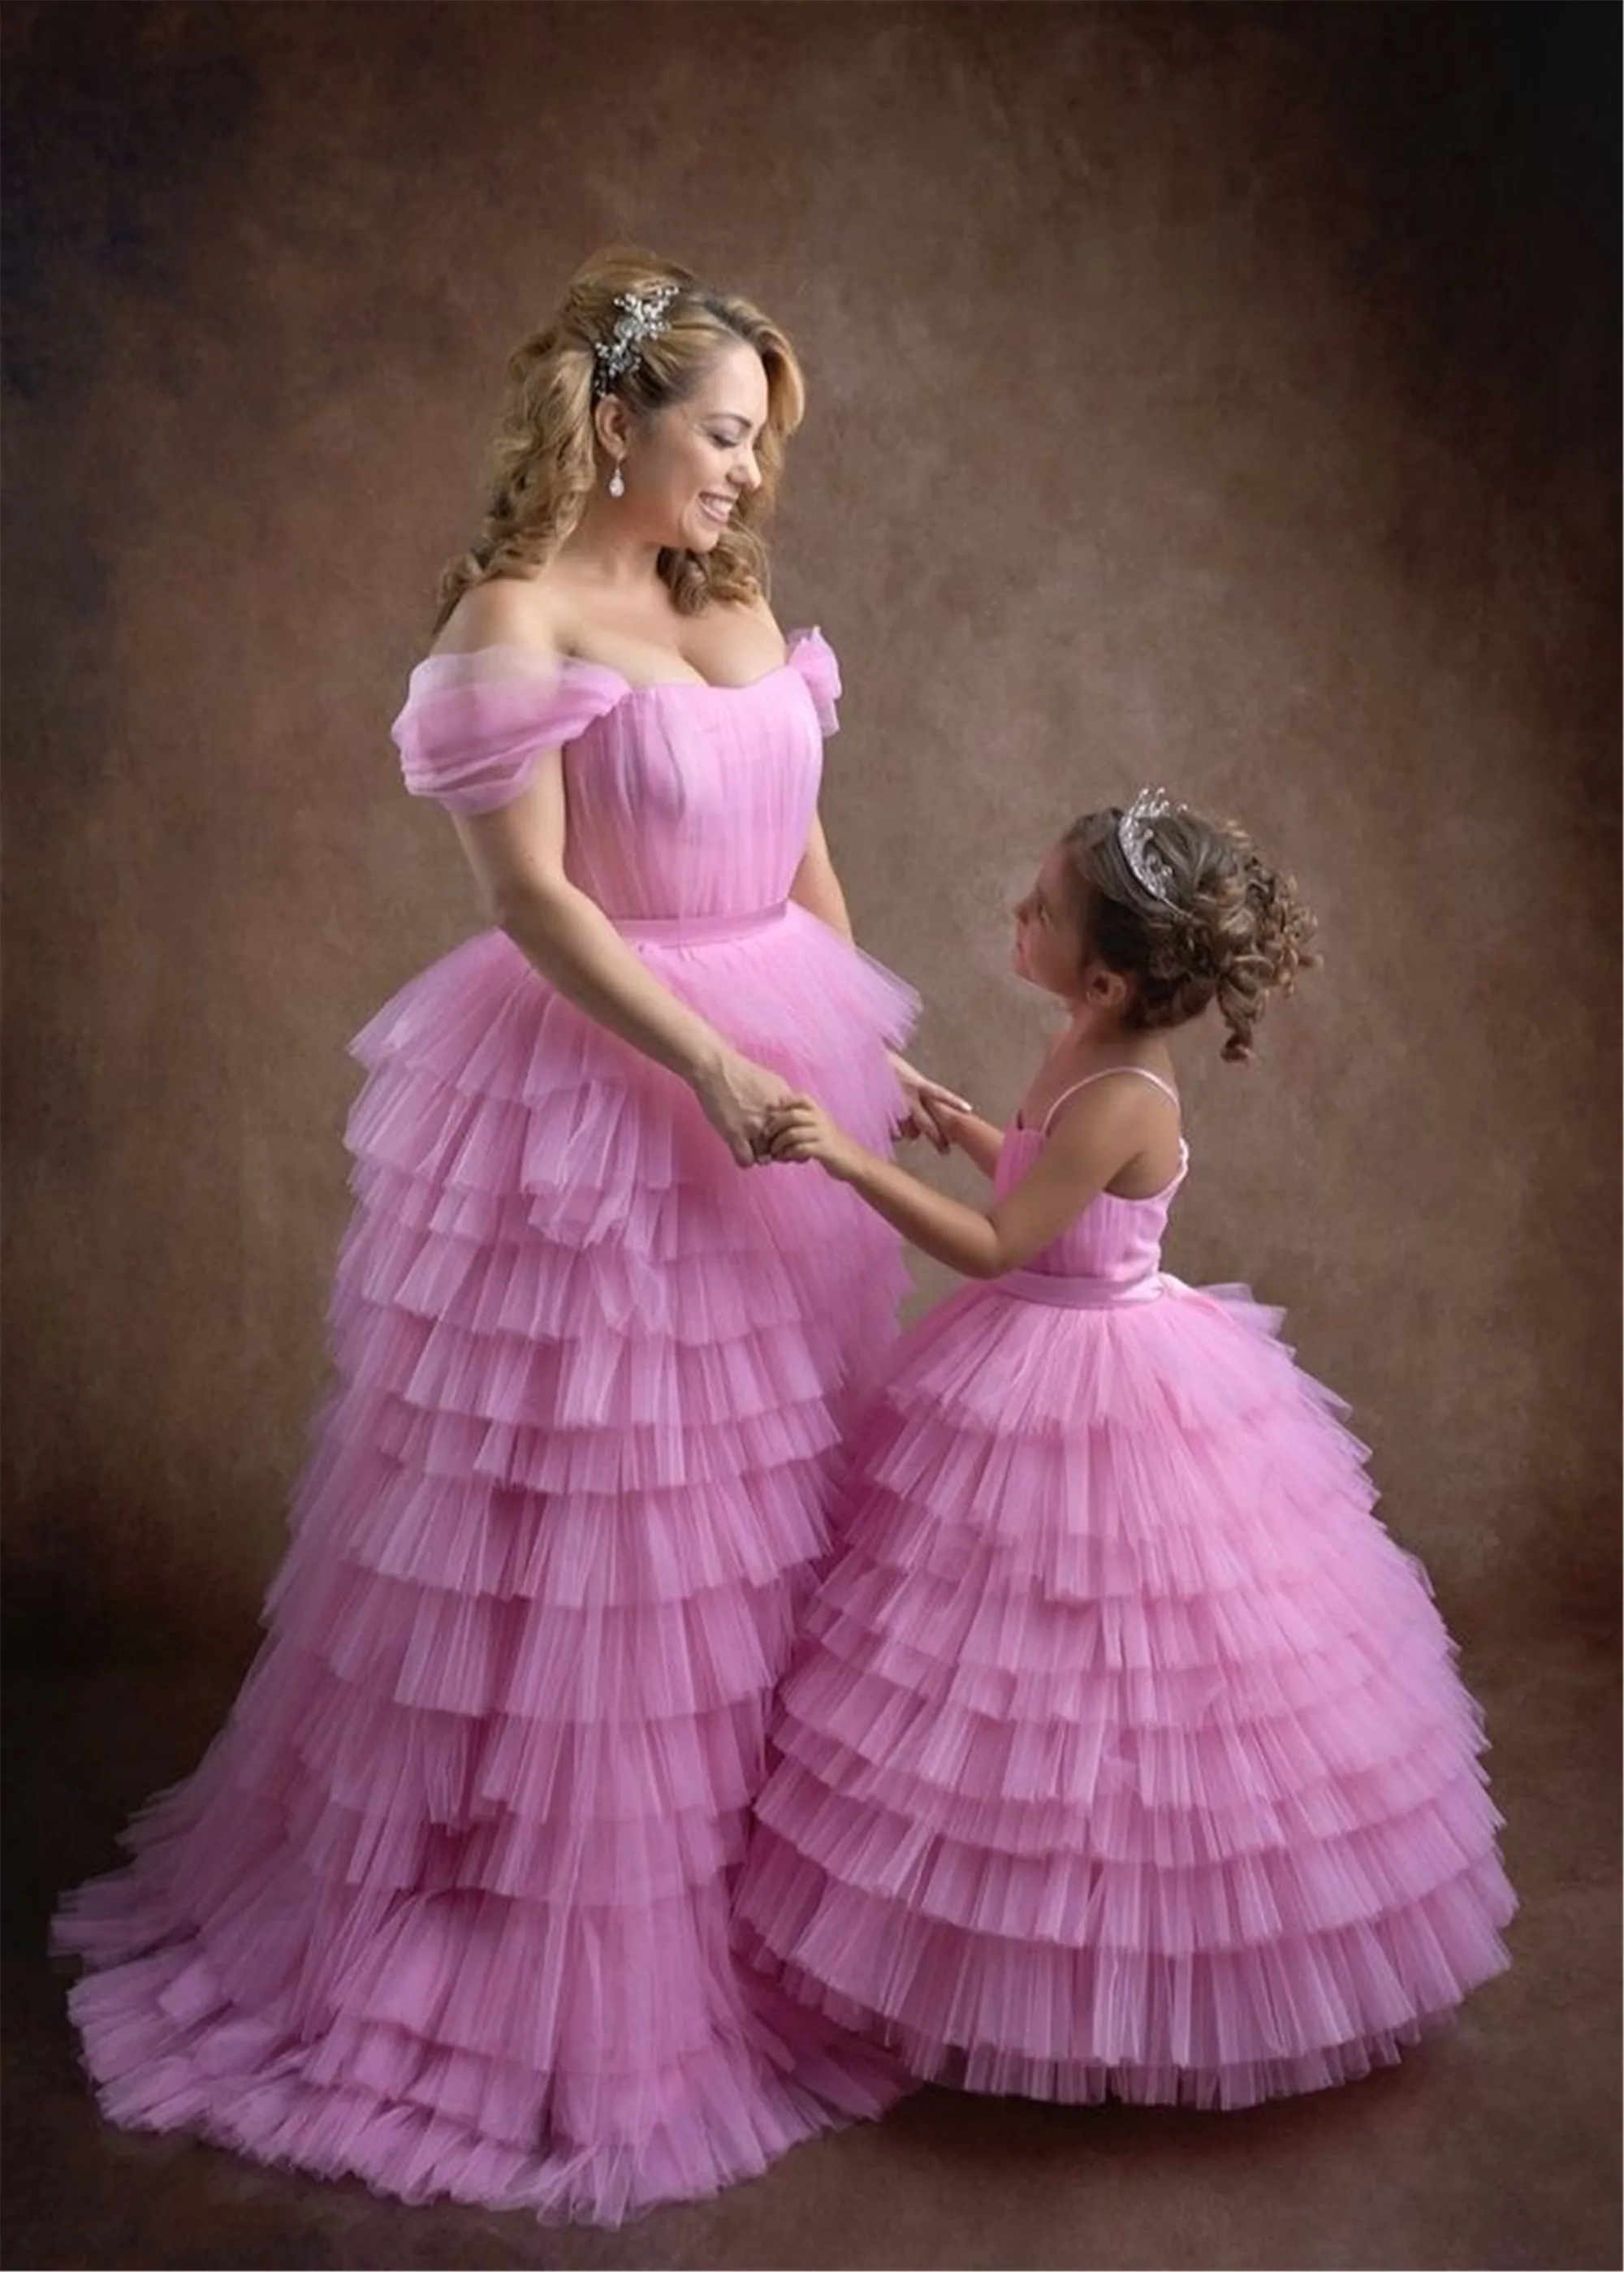 

Blush Pink Mother Daughter Puffy Tiers Dresses Ball Gowns Pink Mom And Girls Birthday Party Celebration Photo Gowns Custom